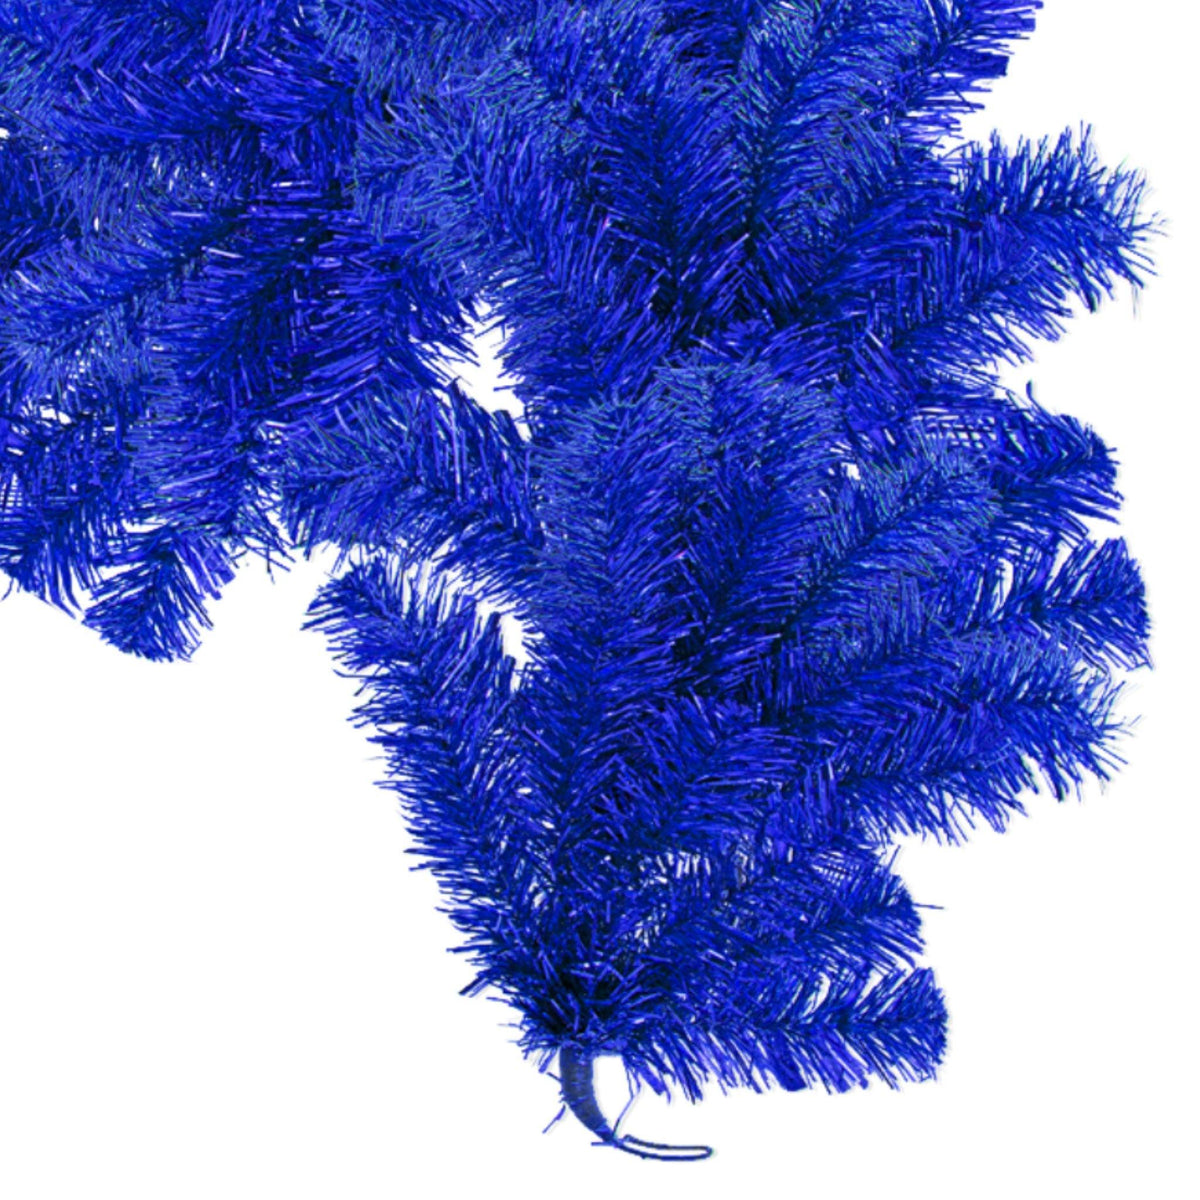 Lee Display's brand new 6FT Blue Tinsel Christmas Garlands on sale at leedisplay.com.  Bottom section with wire